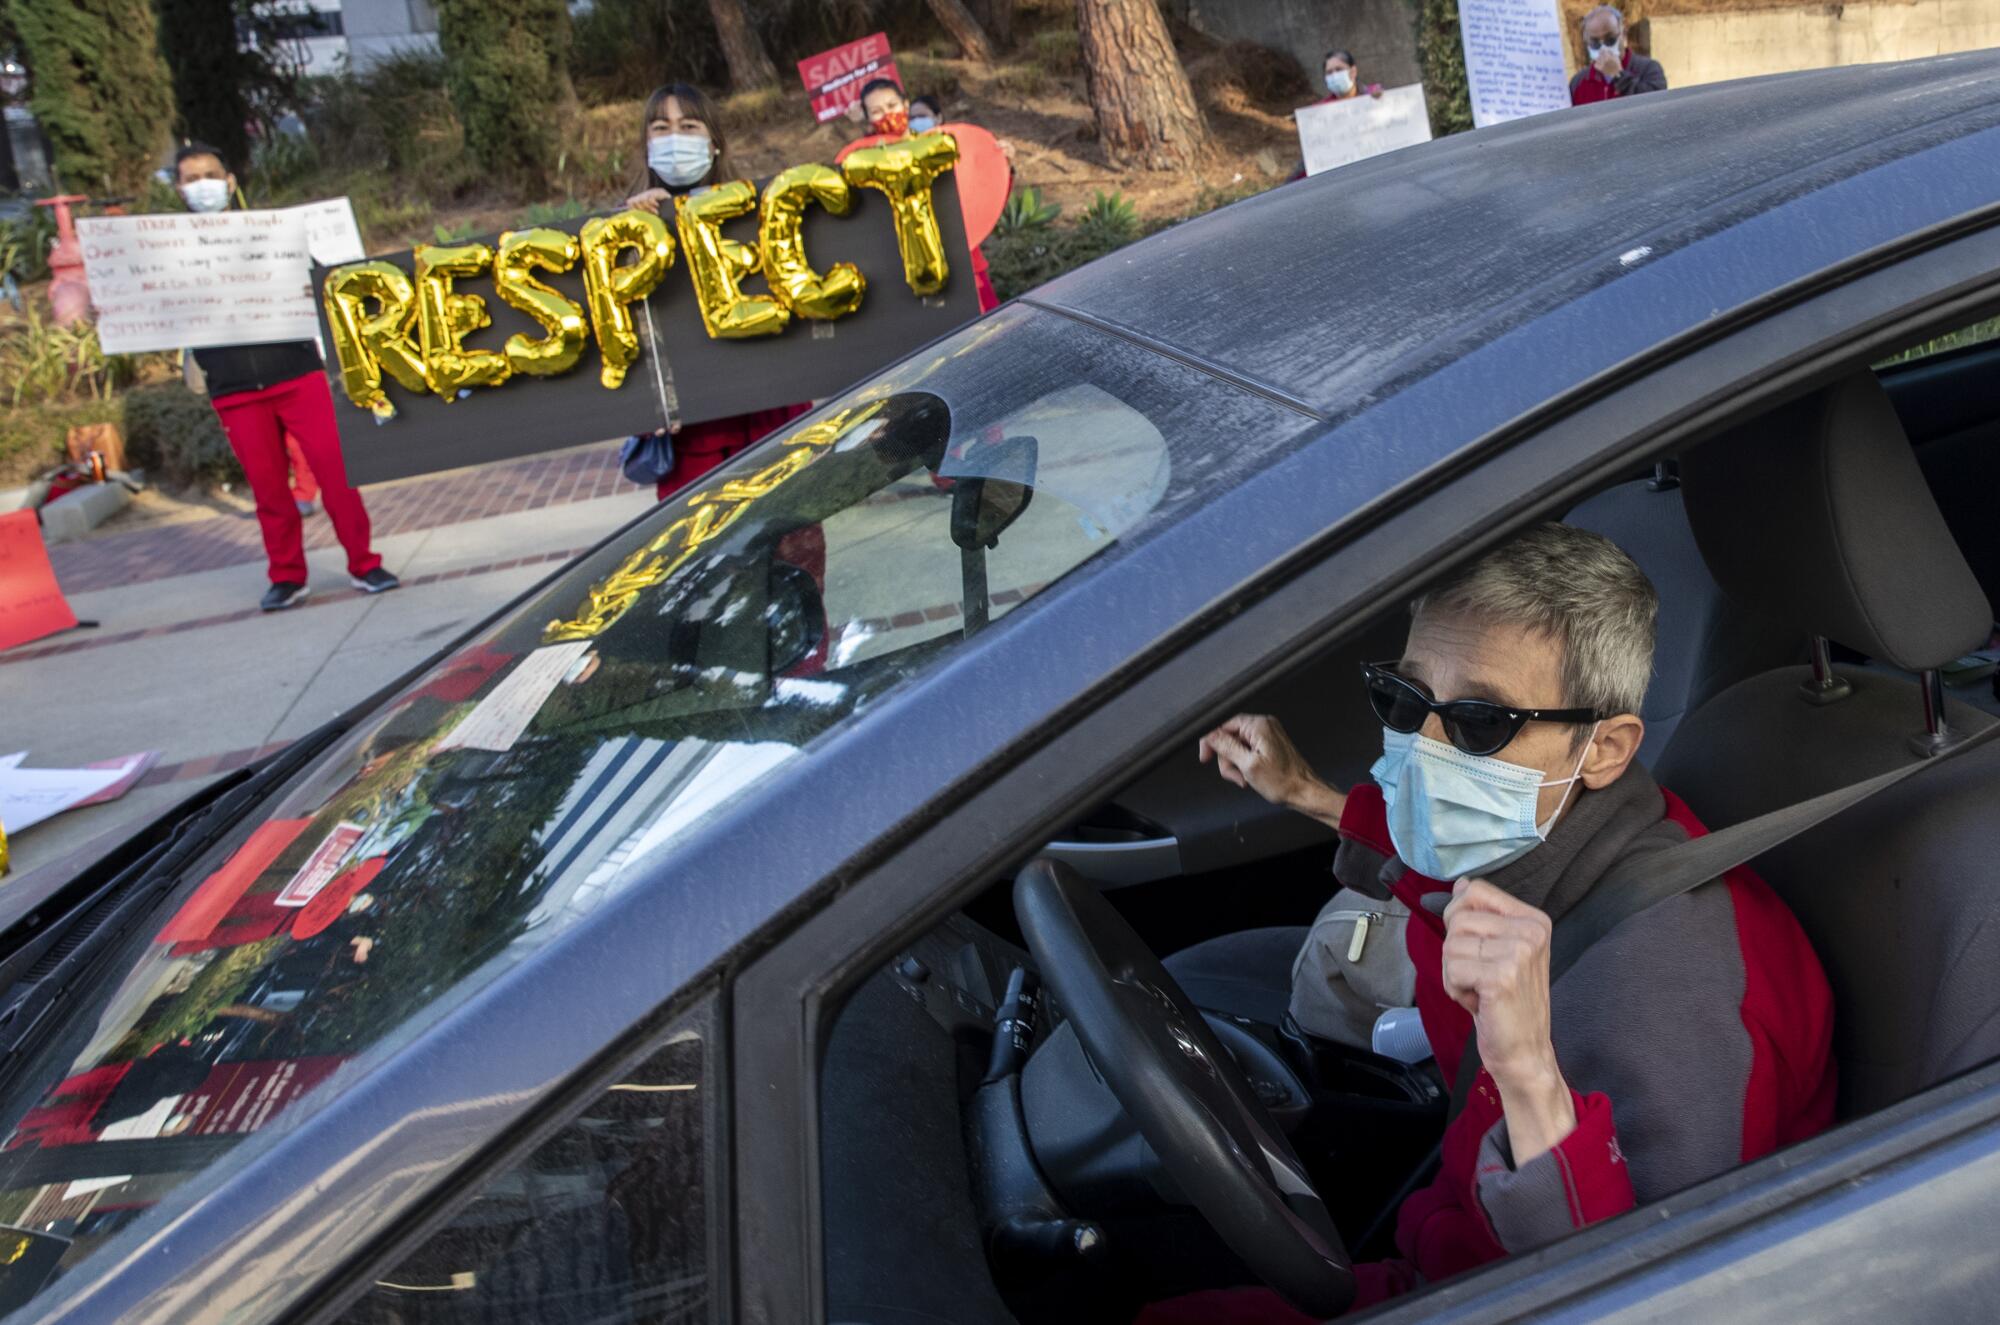 Protesters wearing face masks stand near a sign reading "Respect" as a woman sits in the driver's seat of a car.